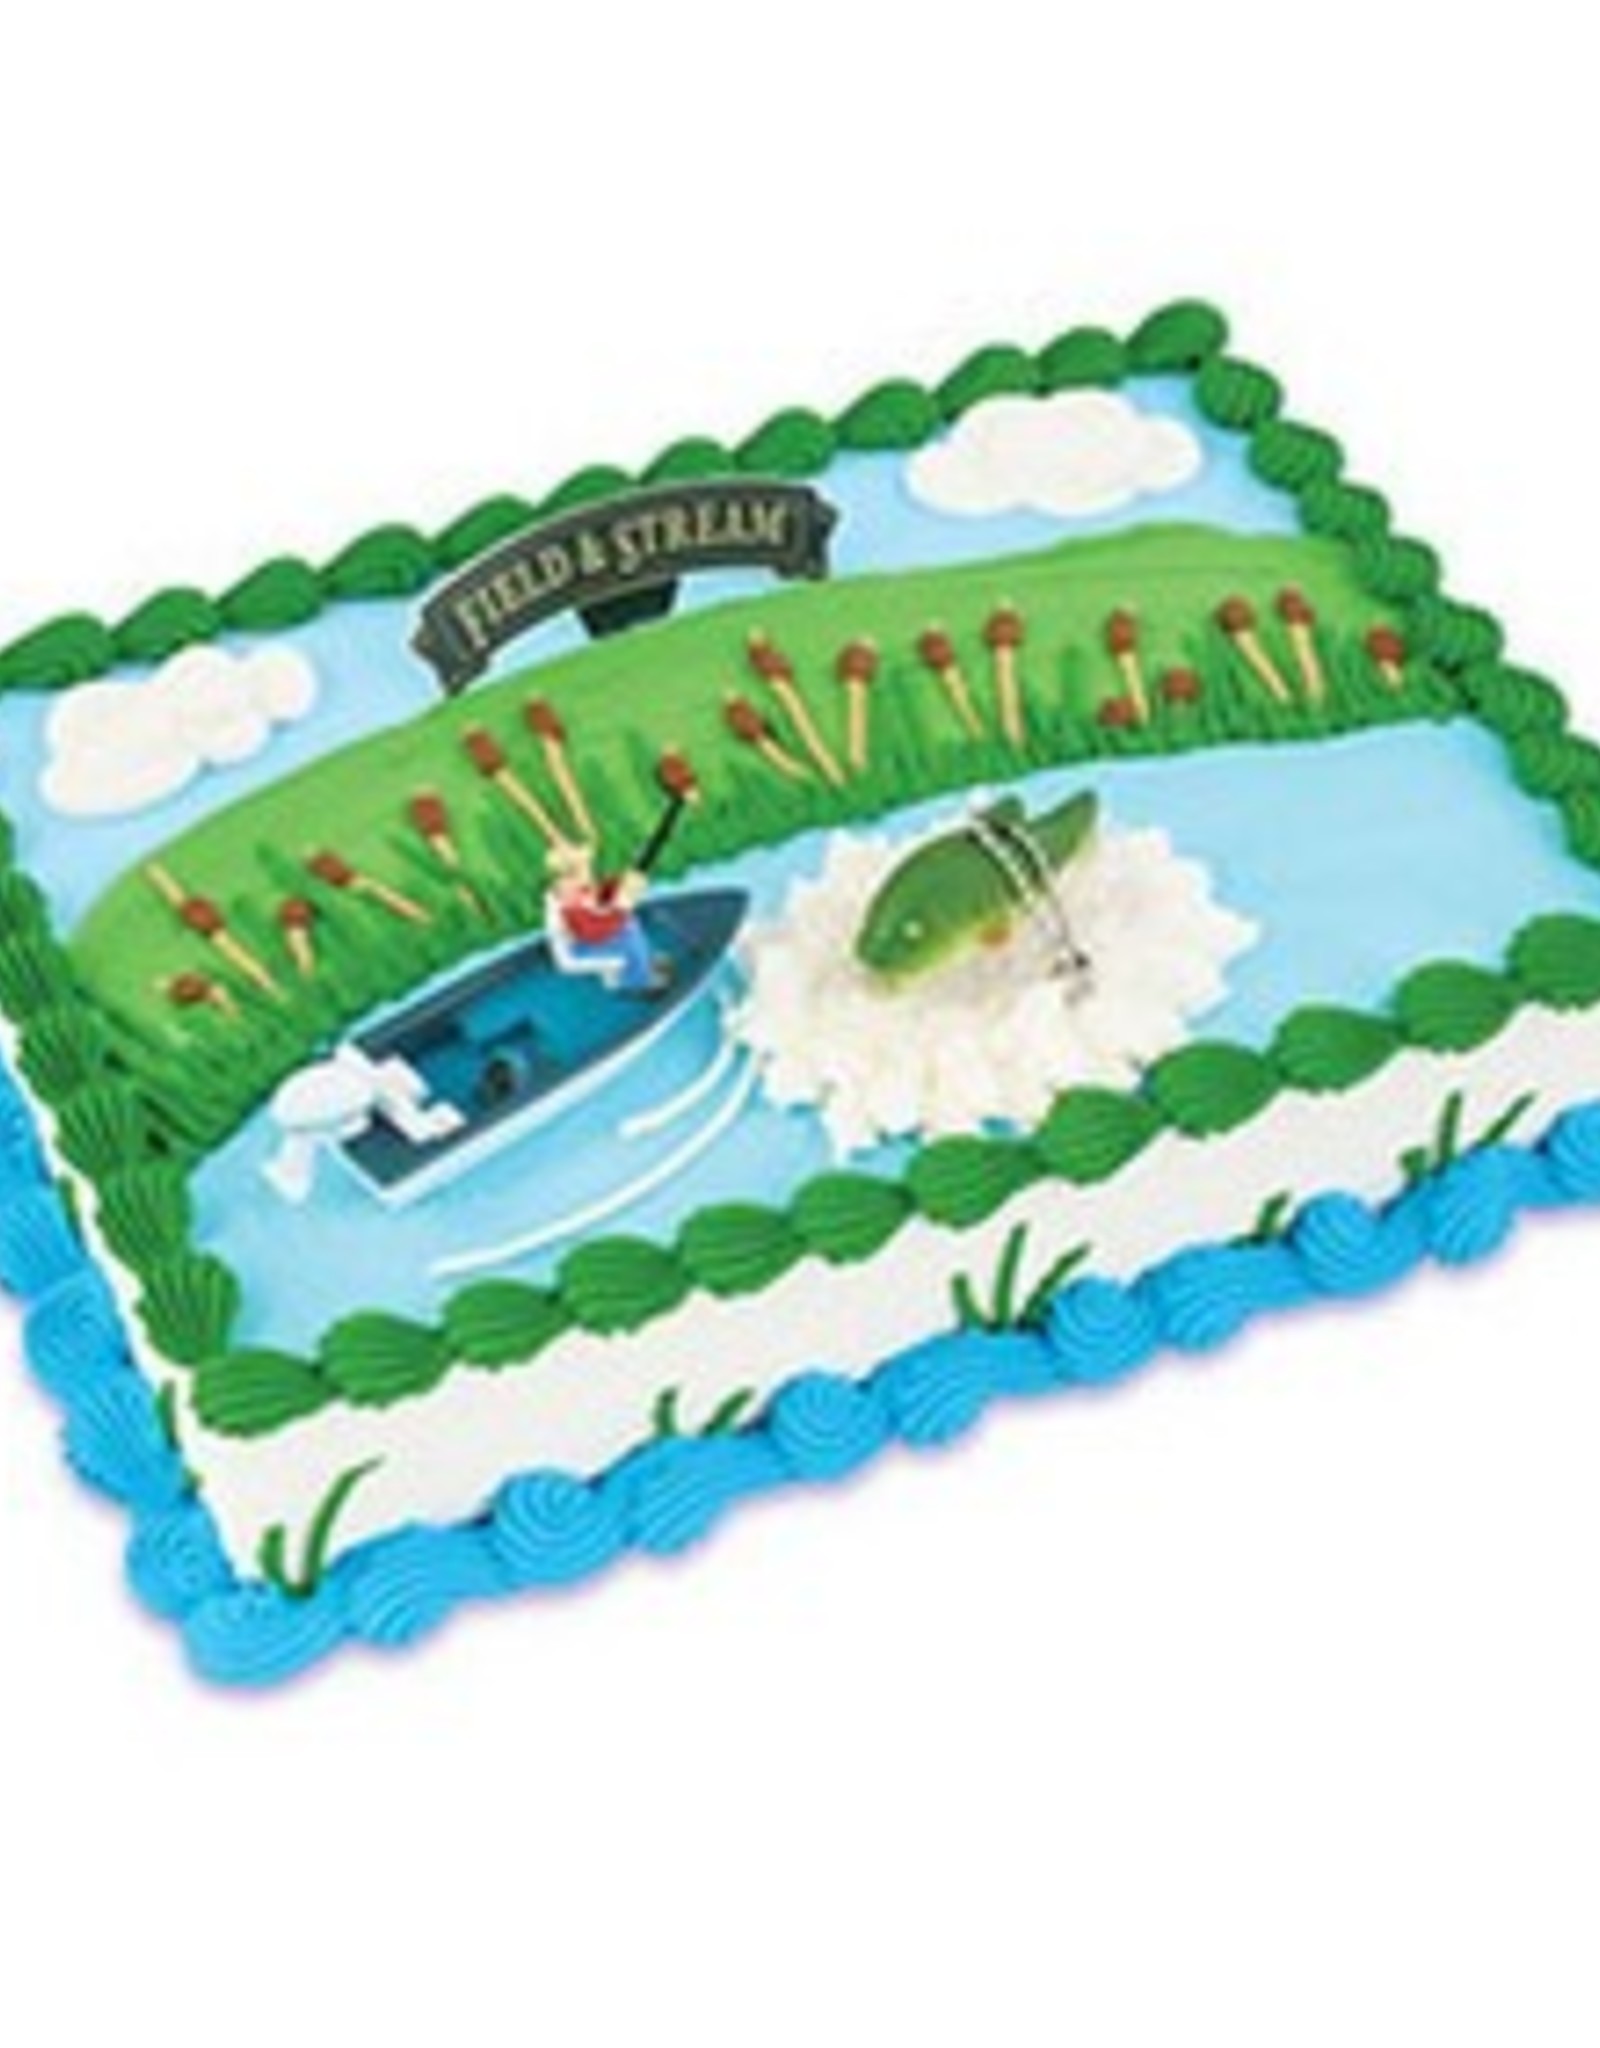 Field and Stream Bass Fisherman Cake Topper - Sweet Baking Supply